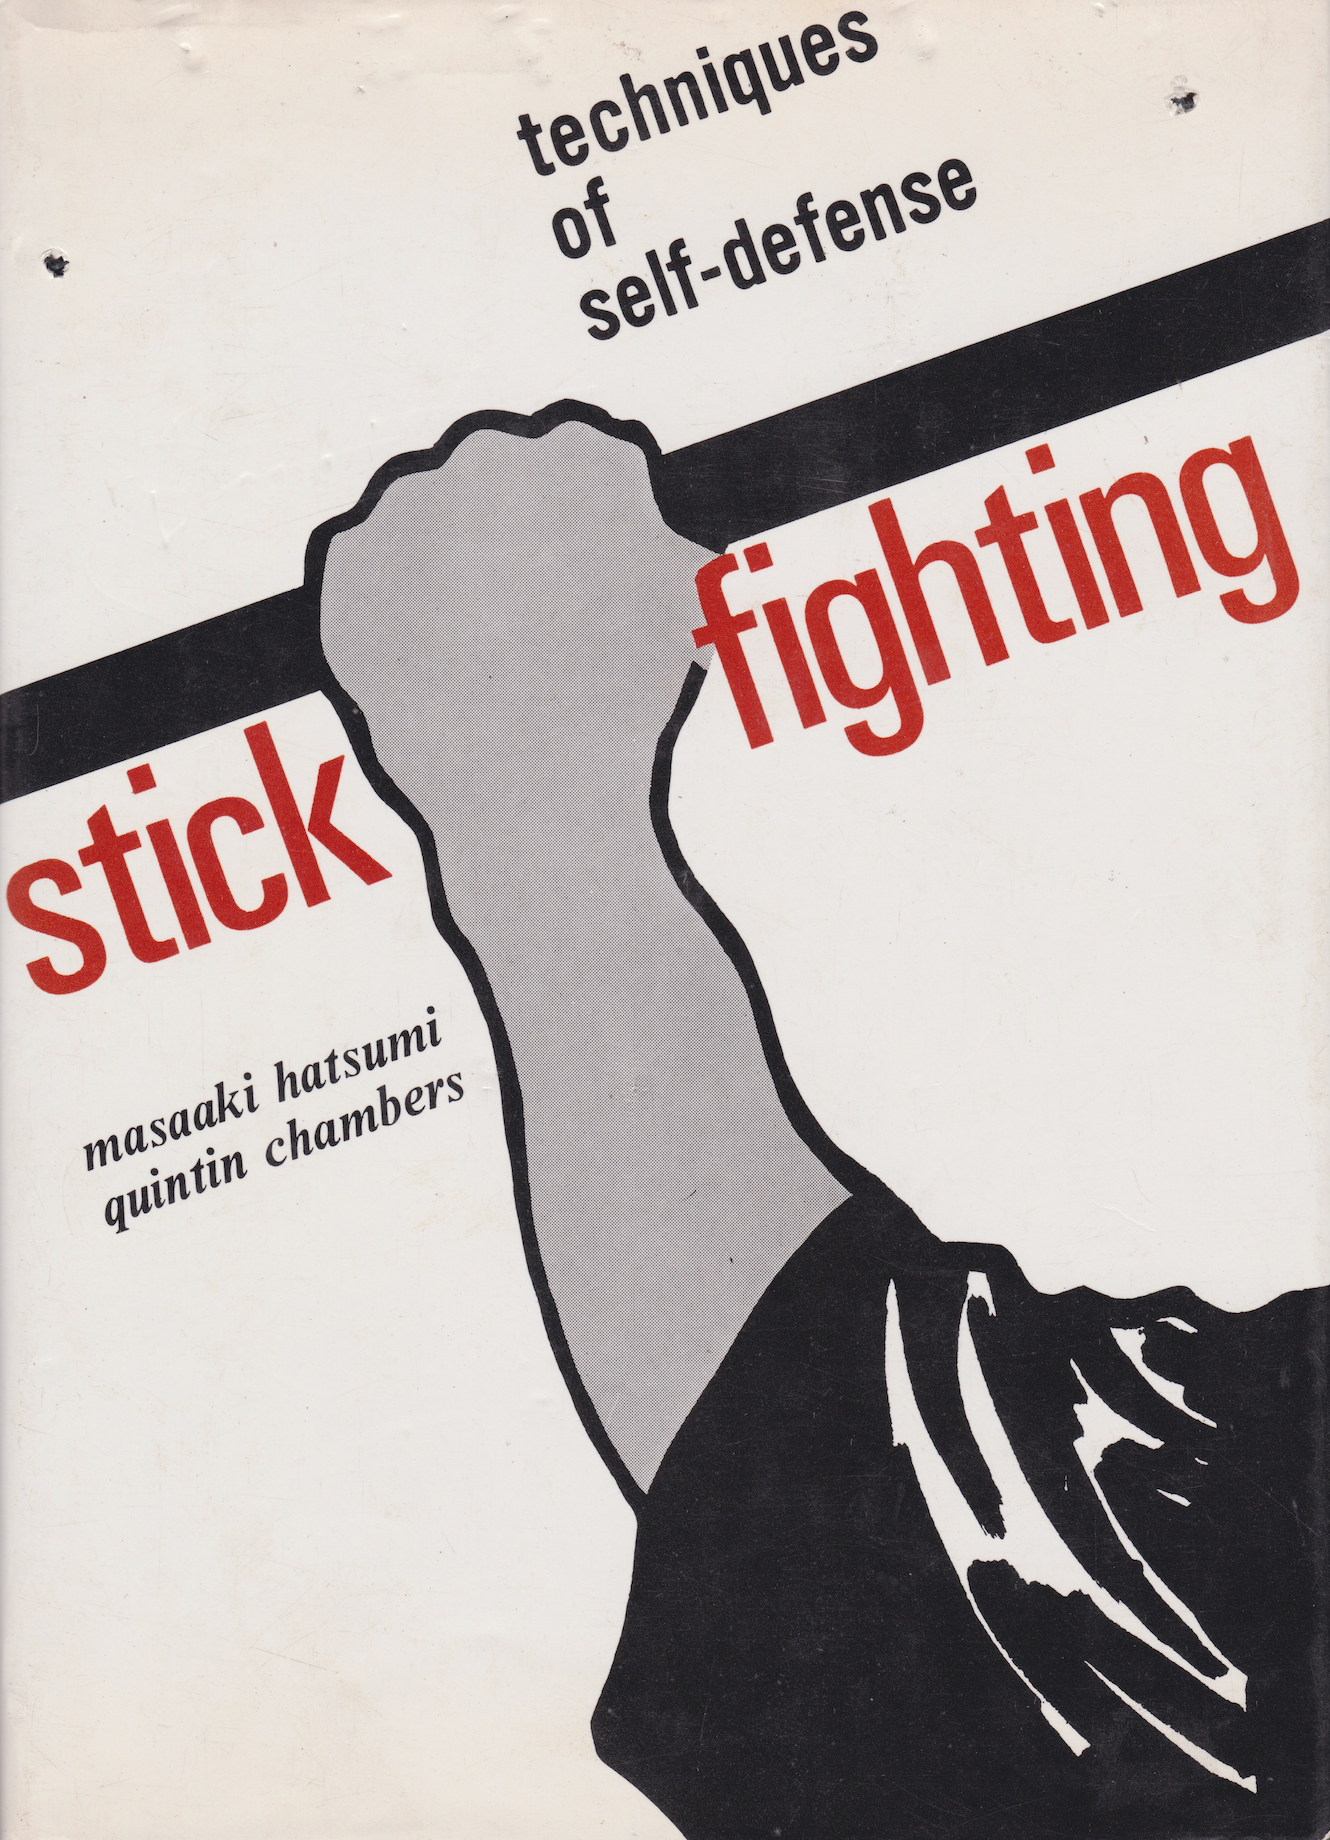 Stick Fighting: Techniques of Self-Defense Book by Masaaki Hatsumi (1st Edition)(Hardcover)(Preowned)